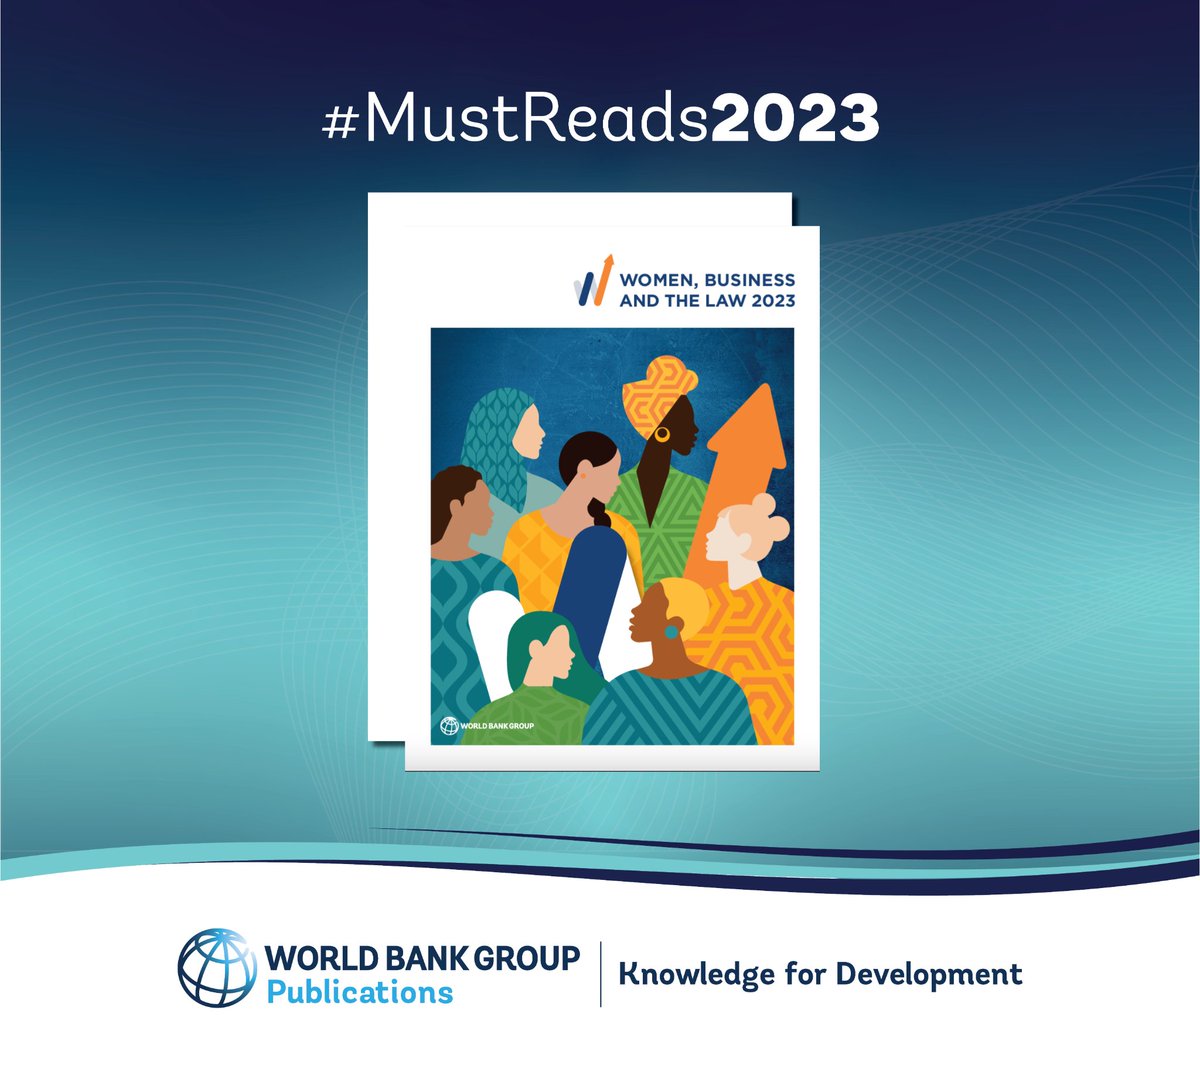 Women, Business and the Law 2023 assesses laws and regulations on women’s economic participation in 190 economies. In 2022, the global pace of reforms toward equal treatment of women under the law has slumped to a 20-year low: wrld.bg/Hu1150QnuKm #MustReads2023 #WomenBizLaw